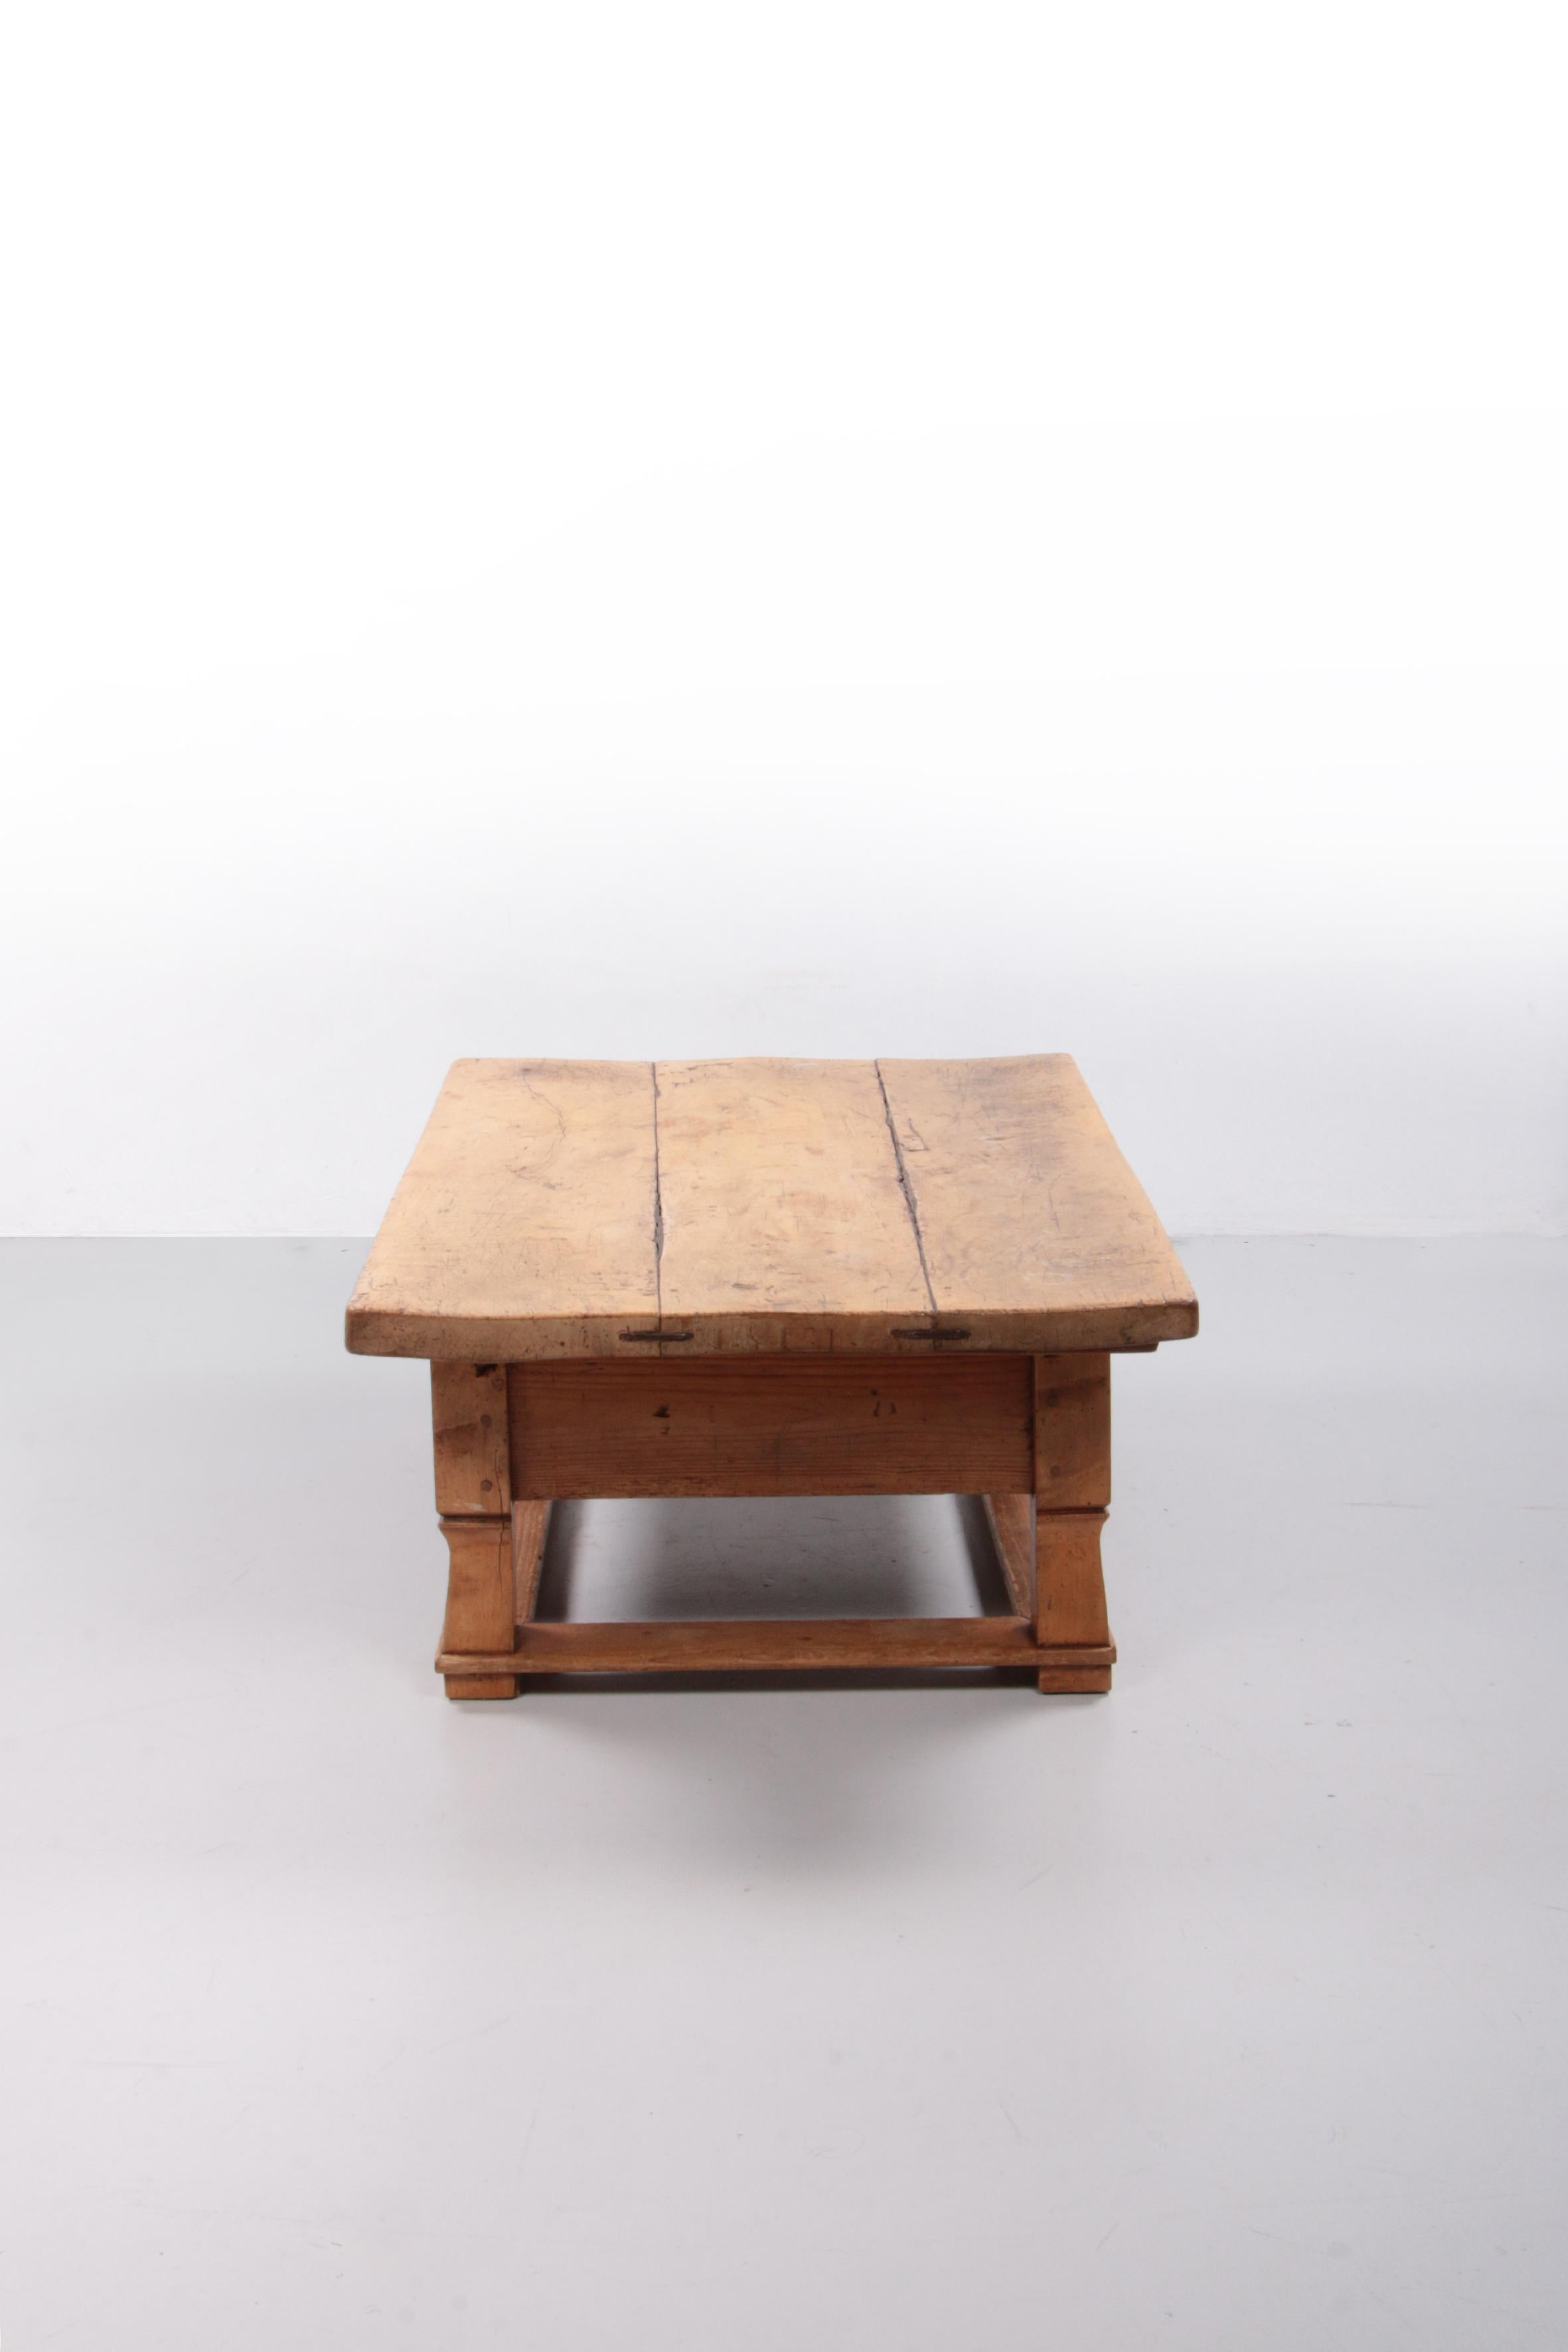 Austrian Coffee Table18- 19th Century Walnut Payment Table with Drawer, Austria For Sale 2